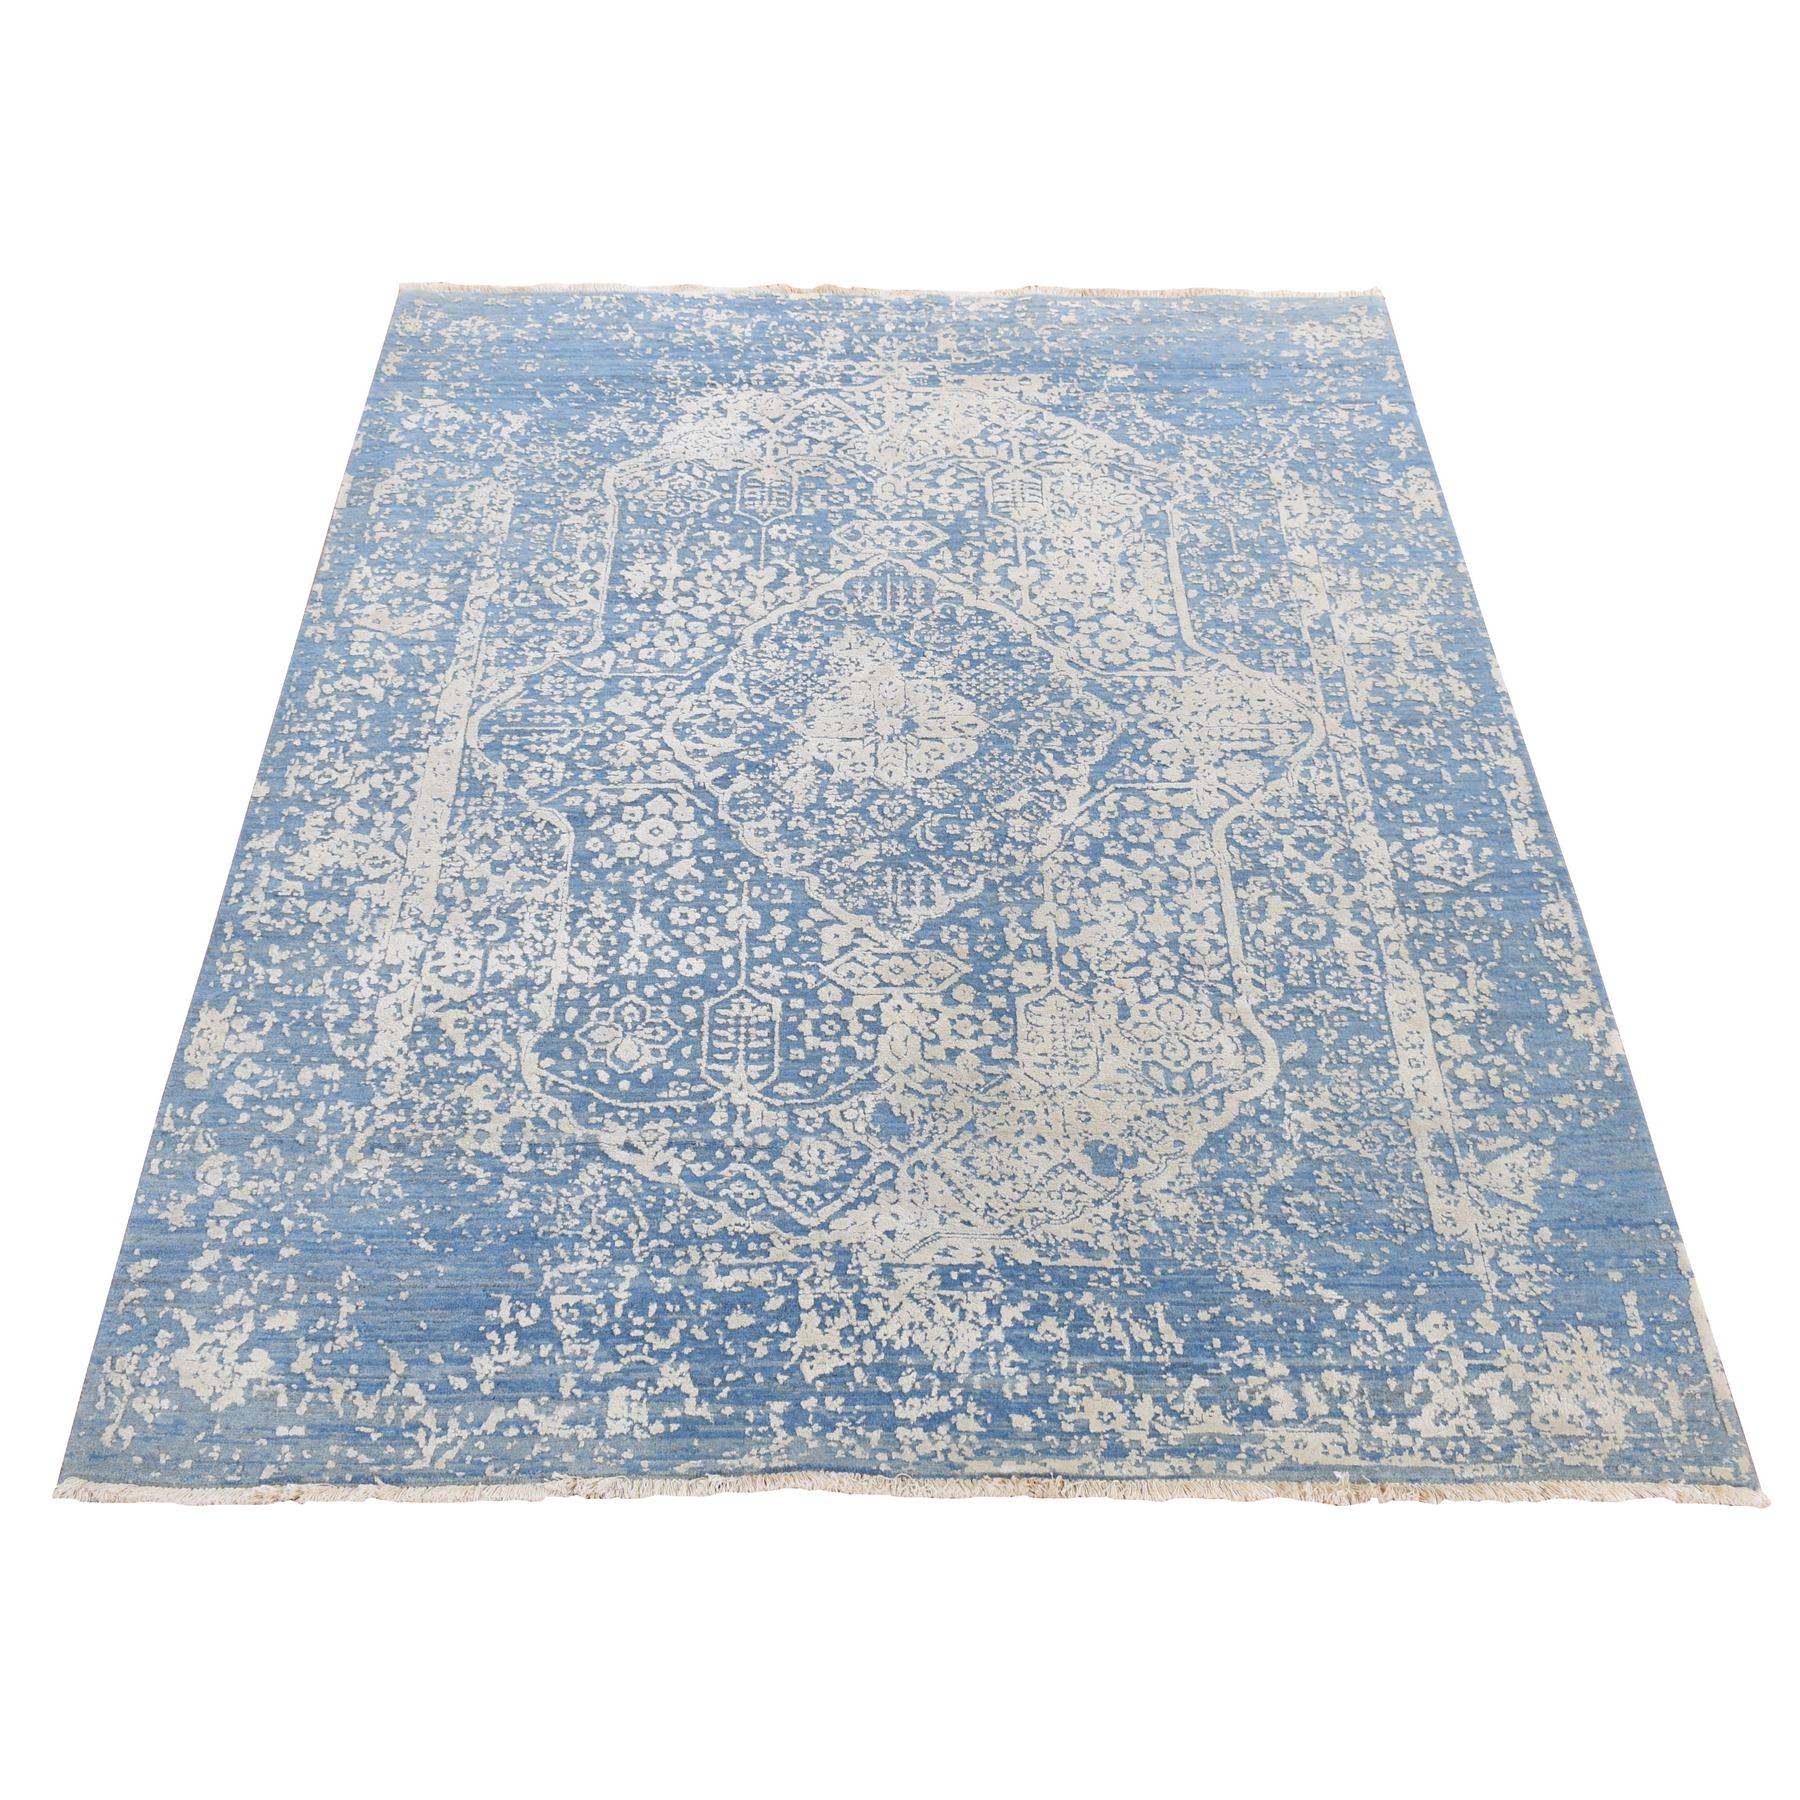 5'1"x7' Air Force Blue, Hand Woven, Broken and Erased Persian Medallion Design, Wool and Pure Silk, Oriental Rug 